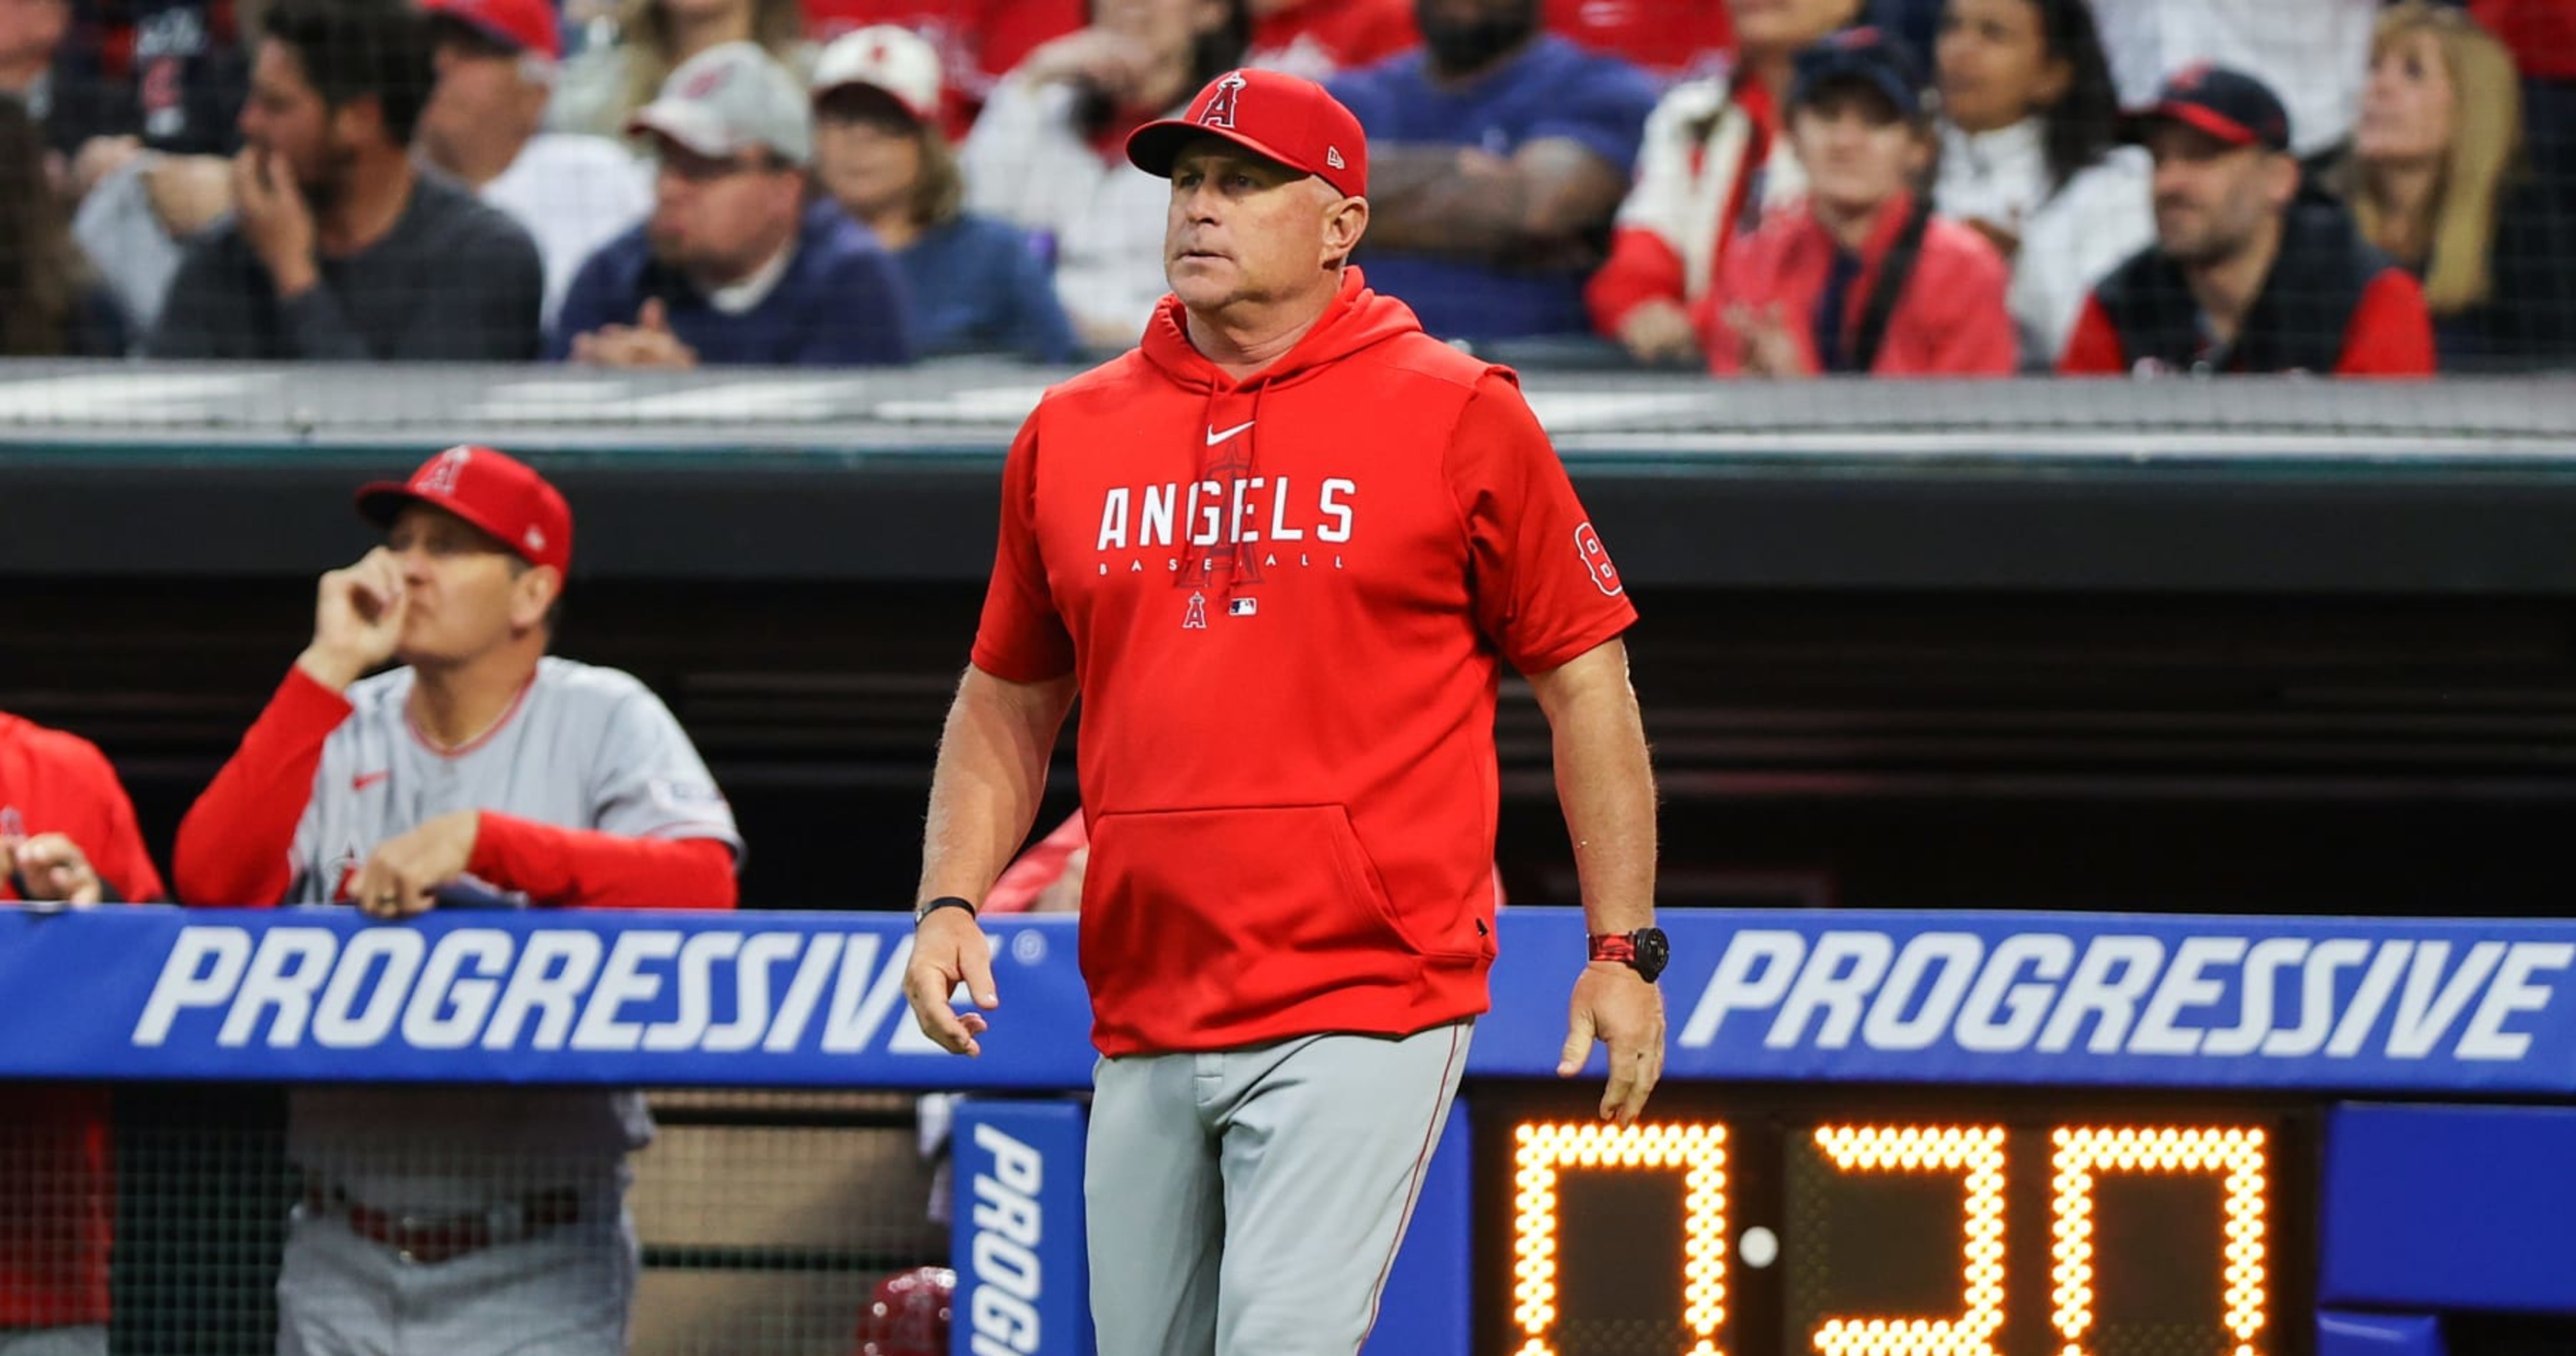 MLB managers find incompetence, impatience make hot seat even tougher